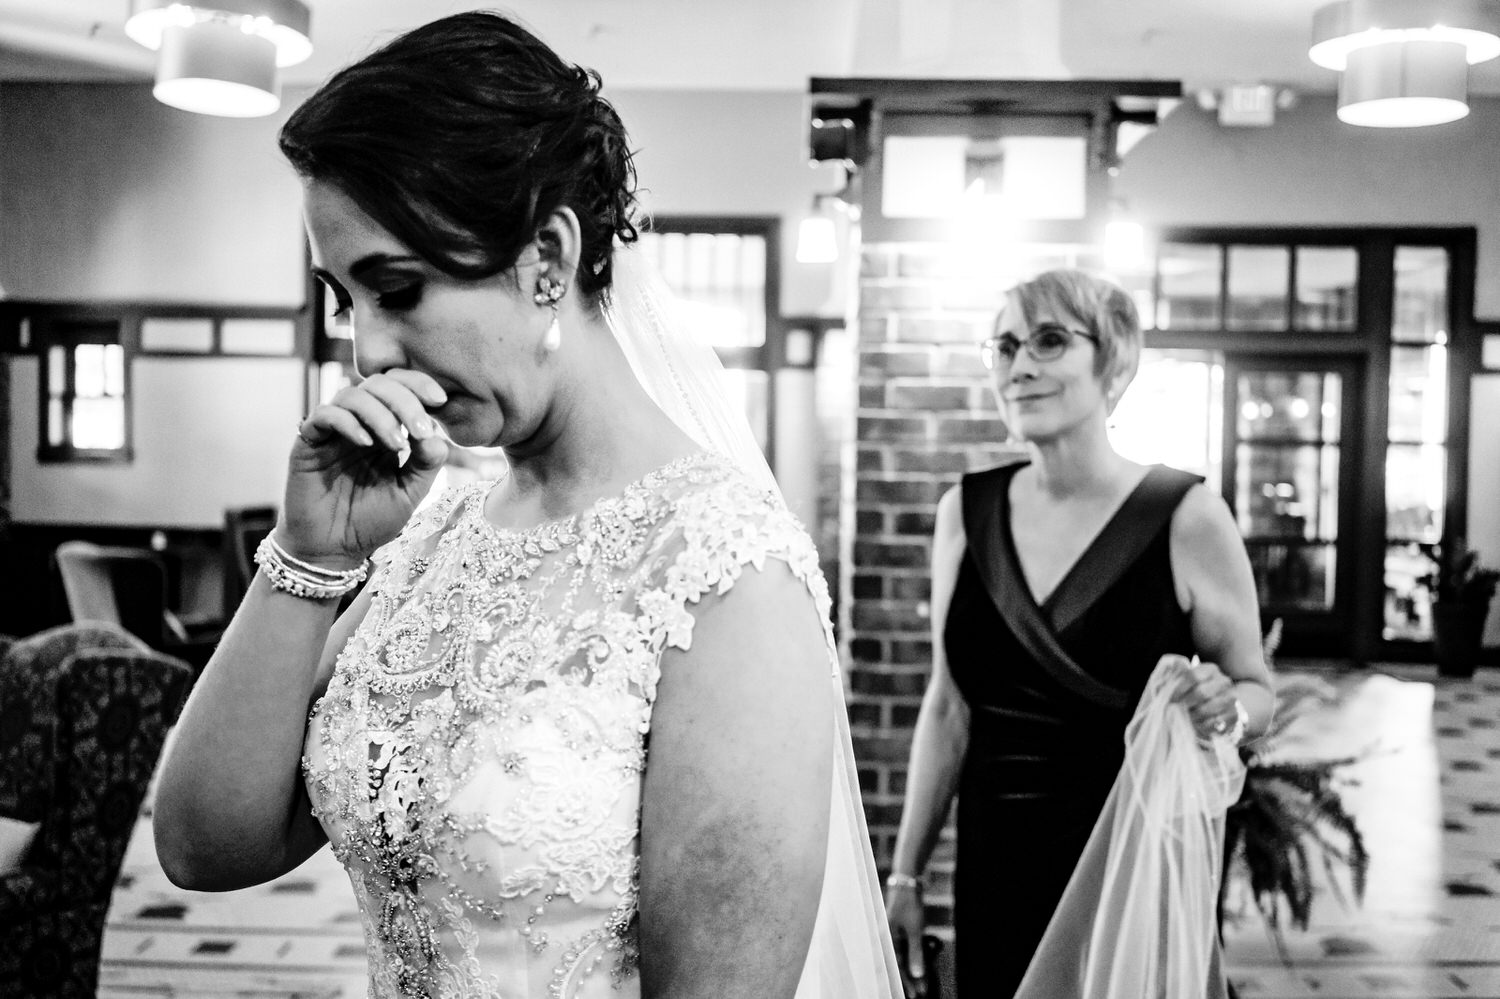 A candid black and white picture of a bride trying to hold back tears as her mom holds her veil, moments before walking down the aisle to get married. 